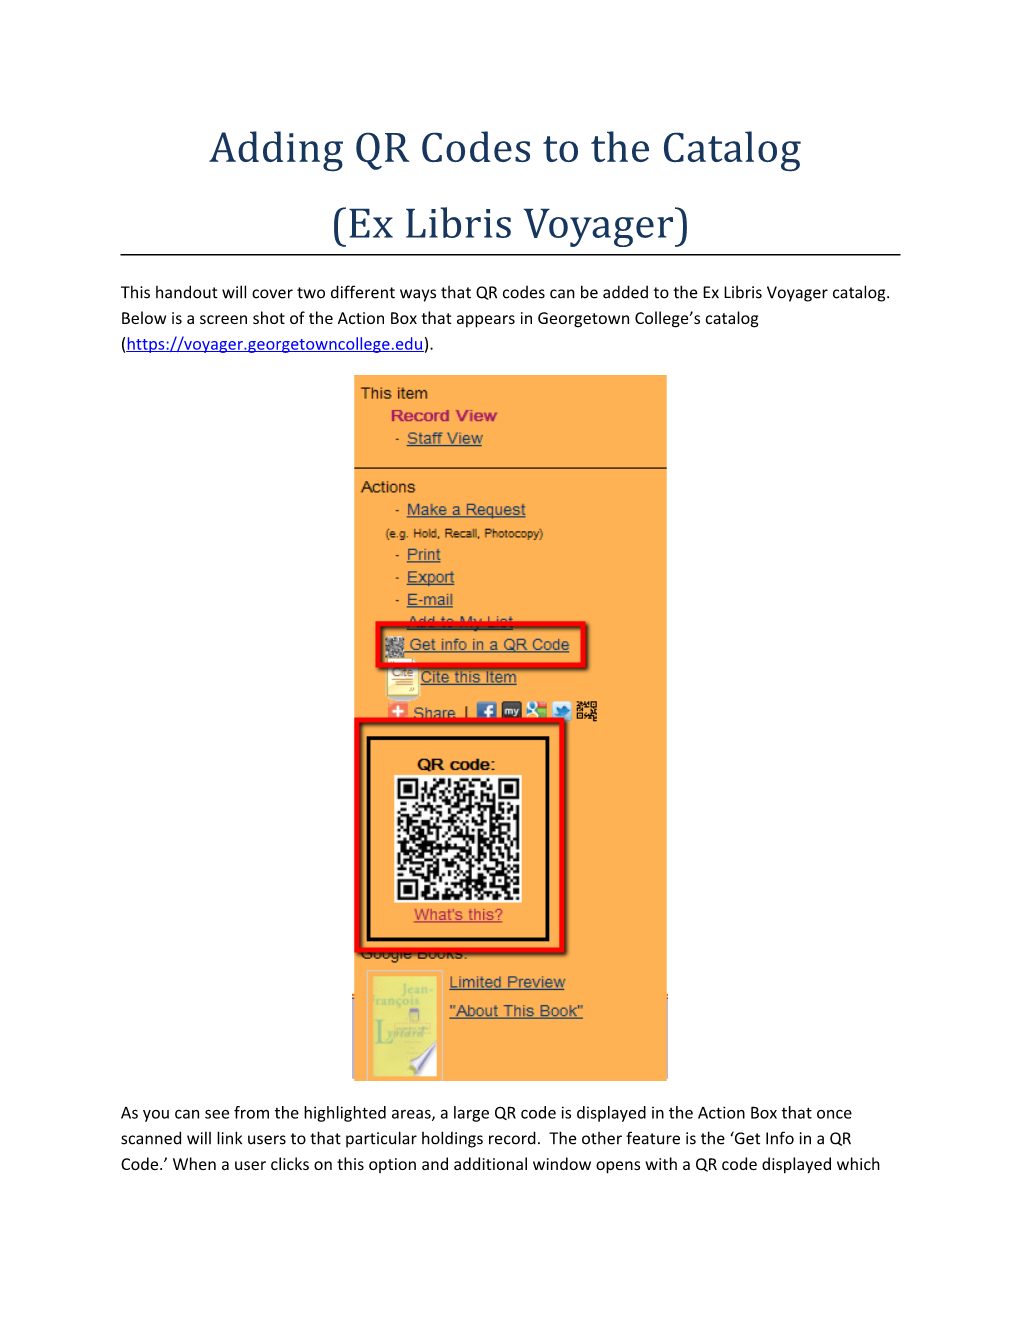 Adding QR Codes to the Catalog